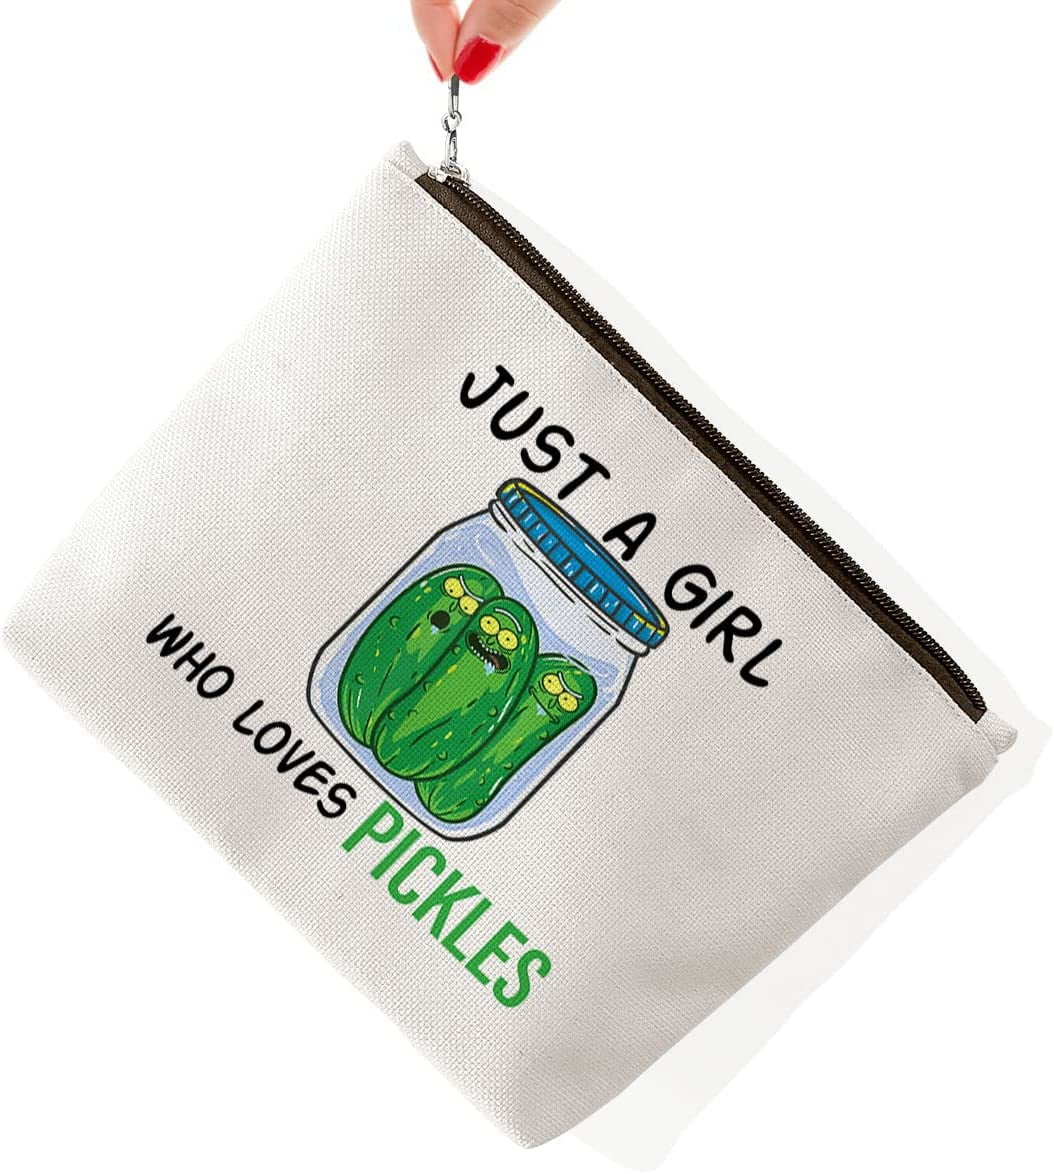 Just A Girl Who Loves Pickles - Cute Pickle Gift product - Just A Girl Who  Love - Sticker